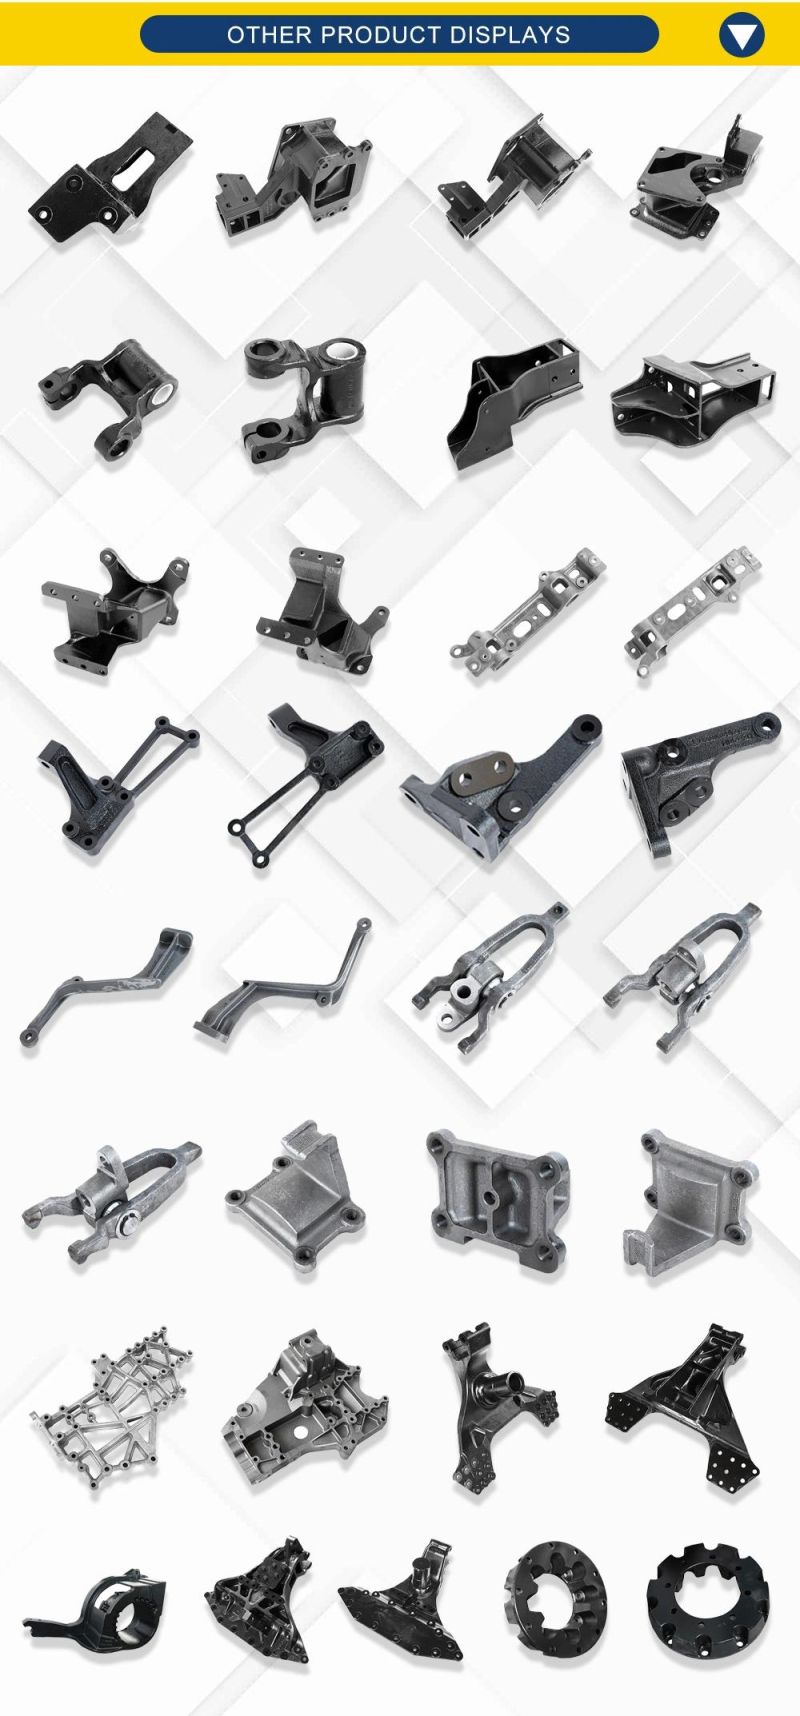 Made in China OEM Truck Parts Engineering Machinery Parts Castings Iron Castings Sand Casting